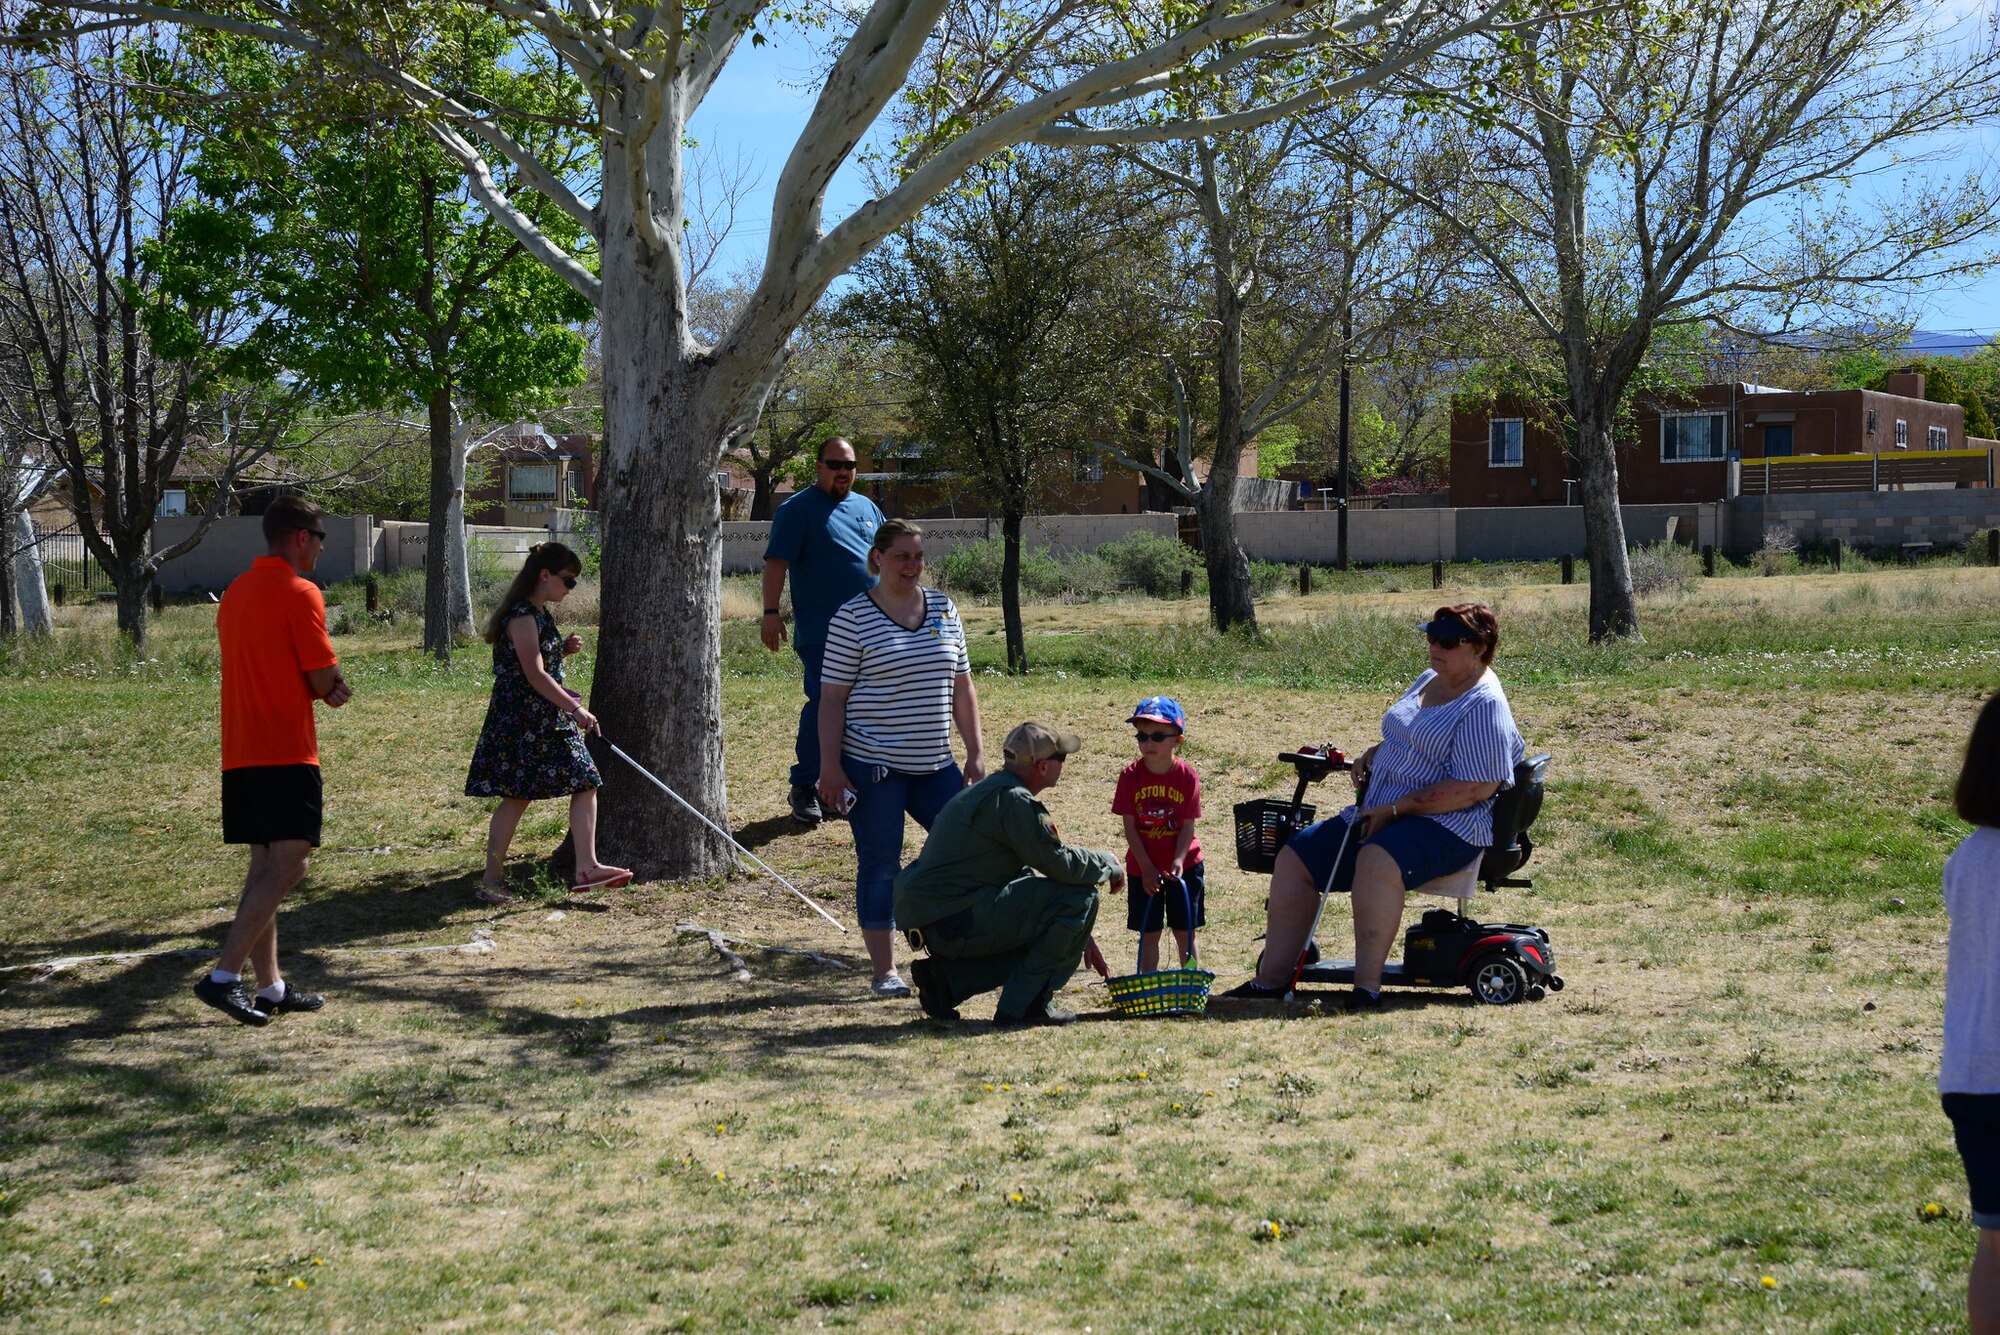 Sgt. Zac Cancilla of the Albuquerque Police Department Bomb Squad assists members of the community during the third annual Beeping Easter Egg Hunt at Loma Linda Park in Albuquerque, NM, April 20, 2019. The eggs, made by the EOD with a beeping mechanism, were hidden throughout the park for blind or impaired vision children to find and trade in for candy and prizes. An EOD robot and suit were also on display for hands on exploration and questions. (U.S. Air Force video by Jessie Perkins)